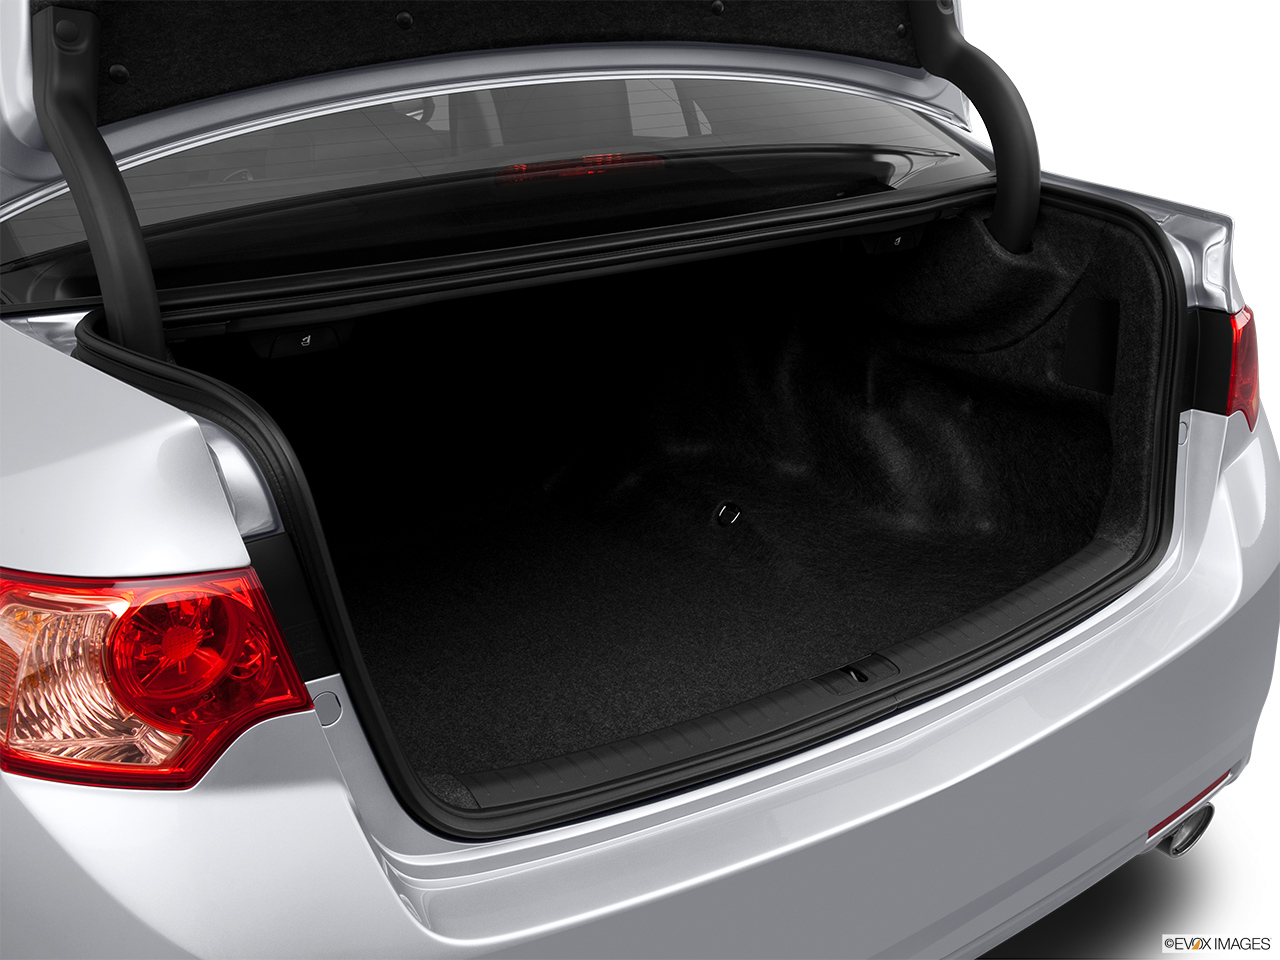 2013 Acura TSX 5-speed Automatic Trunk open. 